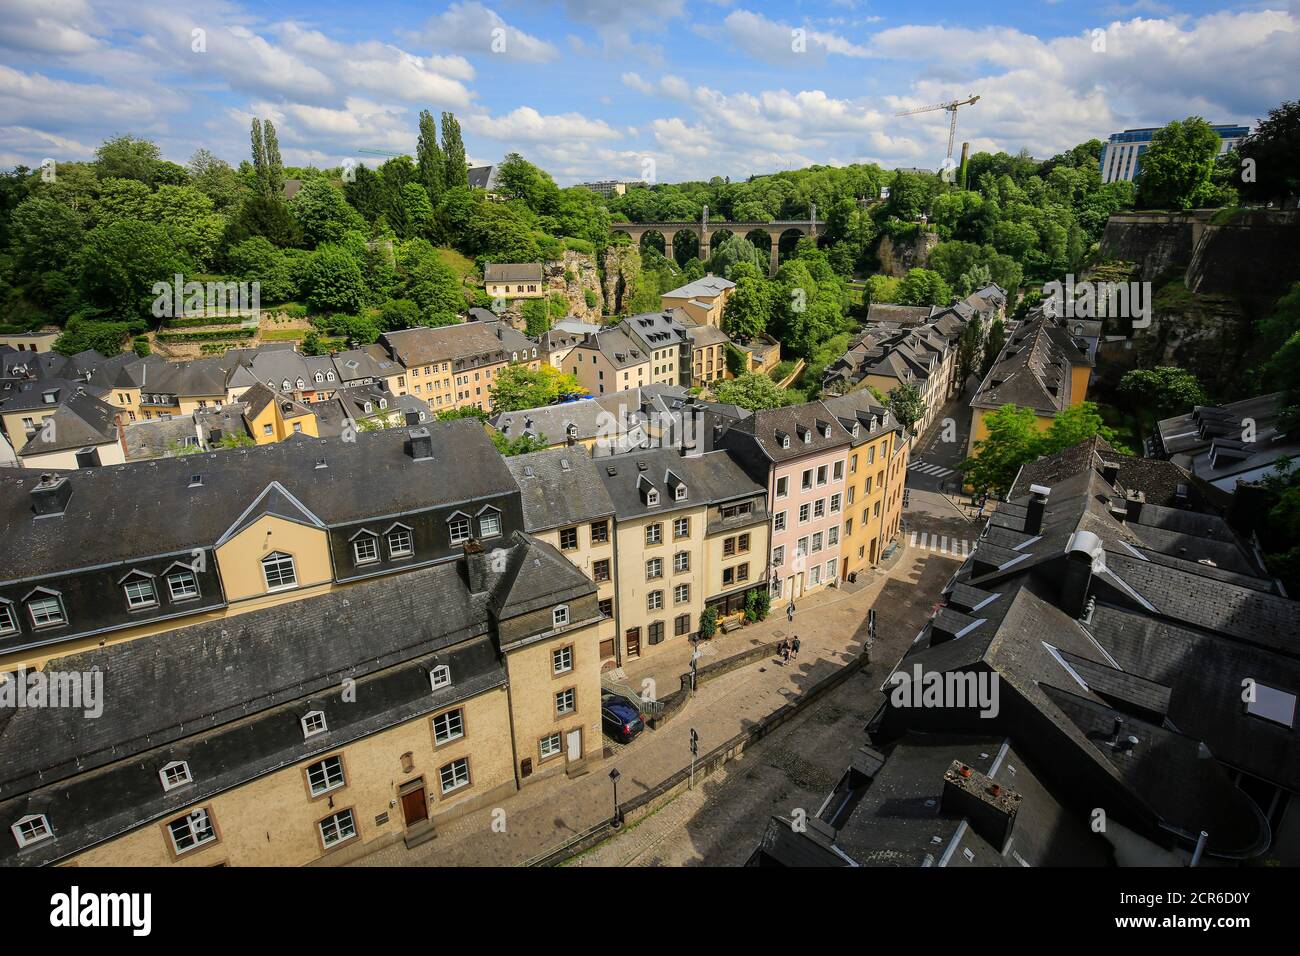 Lower town of Grund, Luxembourg City, Grand Duchy of Luxembourg, Europe Stock Photo